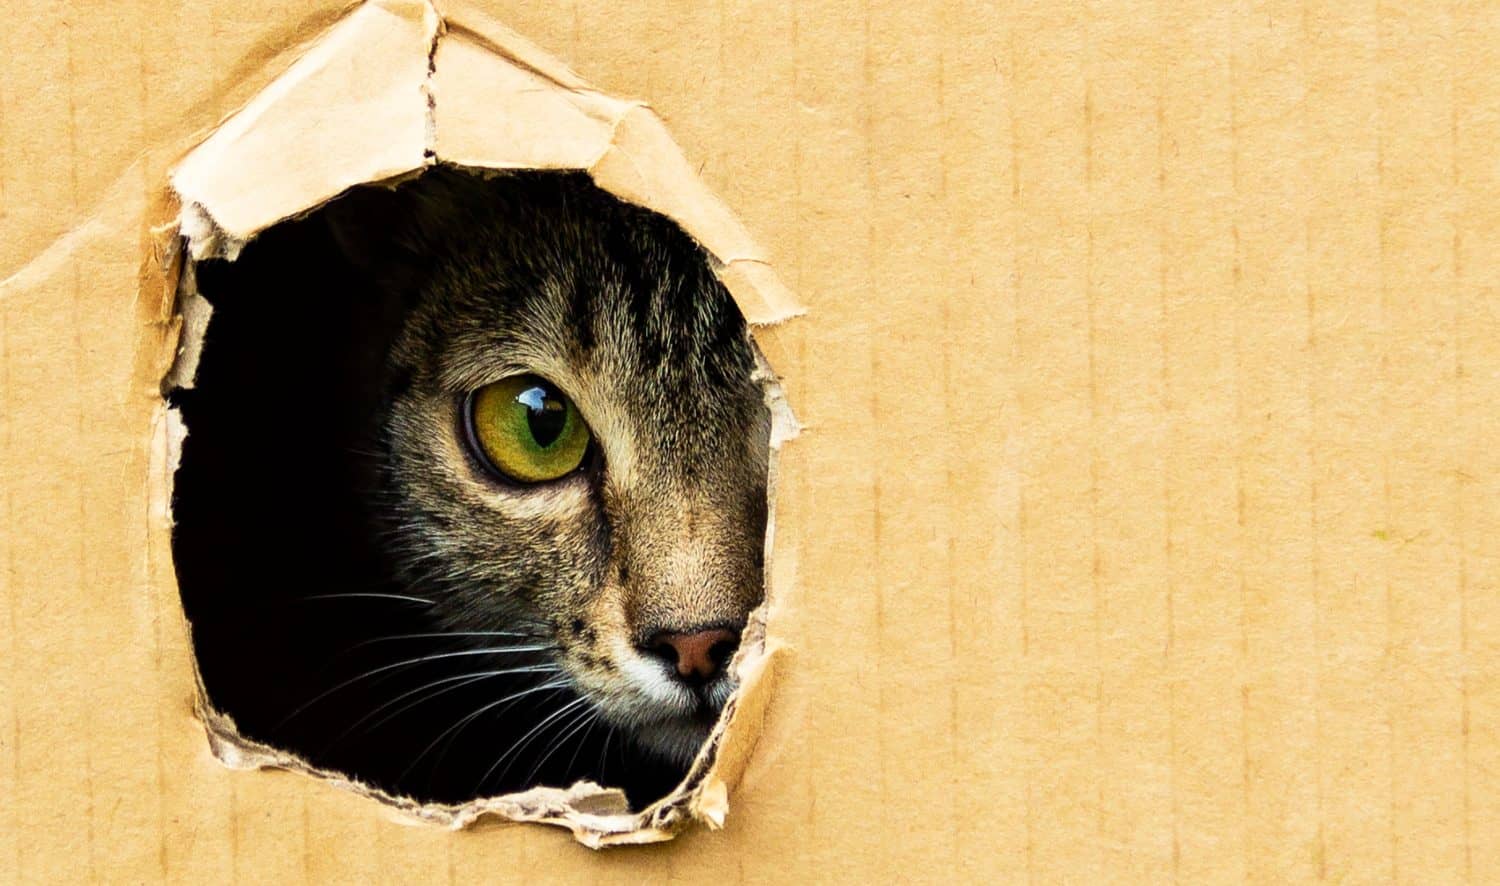 cat curiously looks out from a dark hole in a cardboard box